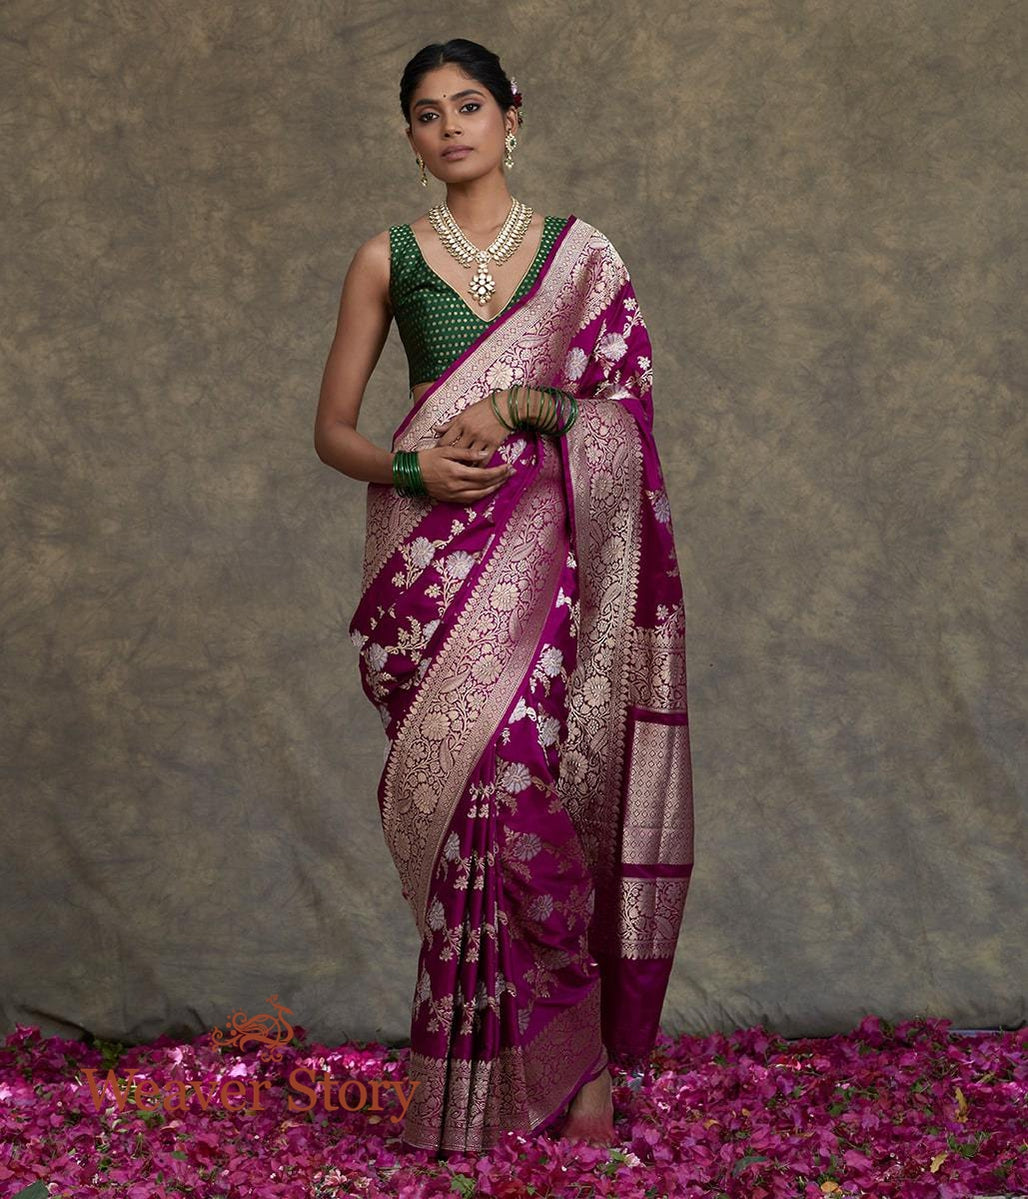 Handwoven_Purple_Sona_Rupa_Floral_Jaal_Saree_with_Brocade_Blouse_WeaverStory_02